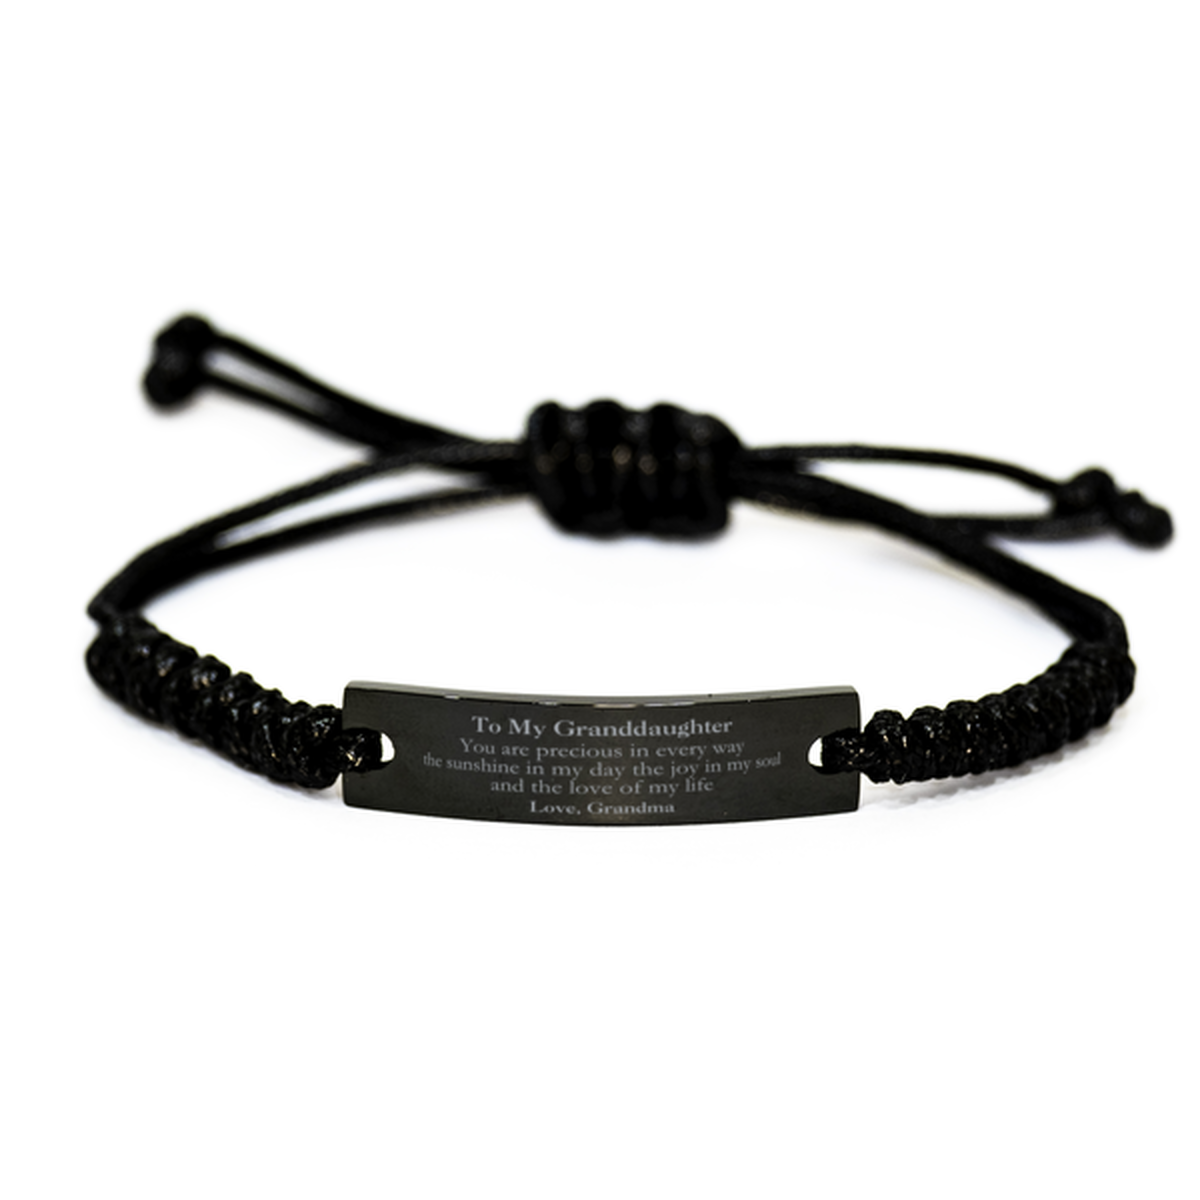 Graduation Gifts for Granddaughter Black Rope Bracelet Present from Grandma, Christmas Granddaughter Birthday Gifts Granddaughter You are precious in every way the sunshine in my day. Love, Grandma